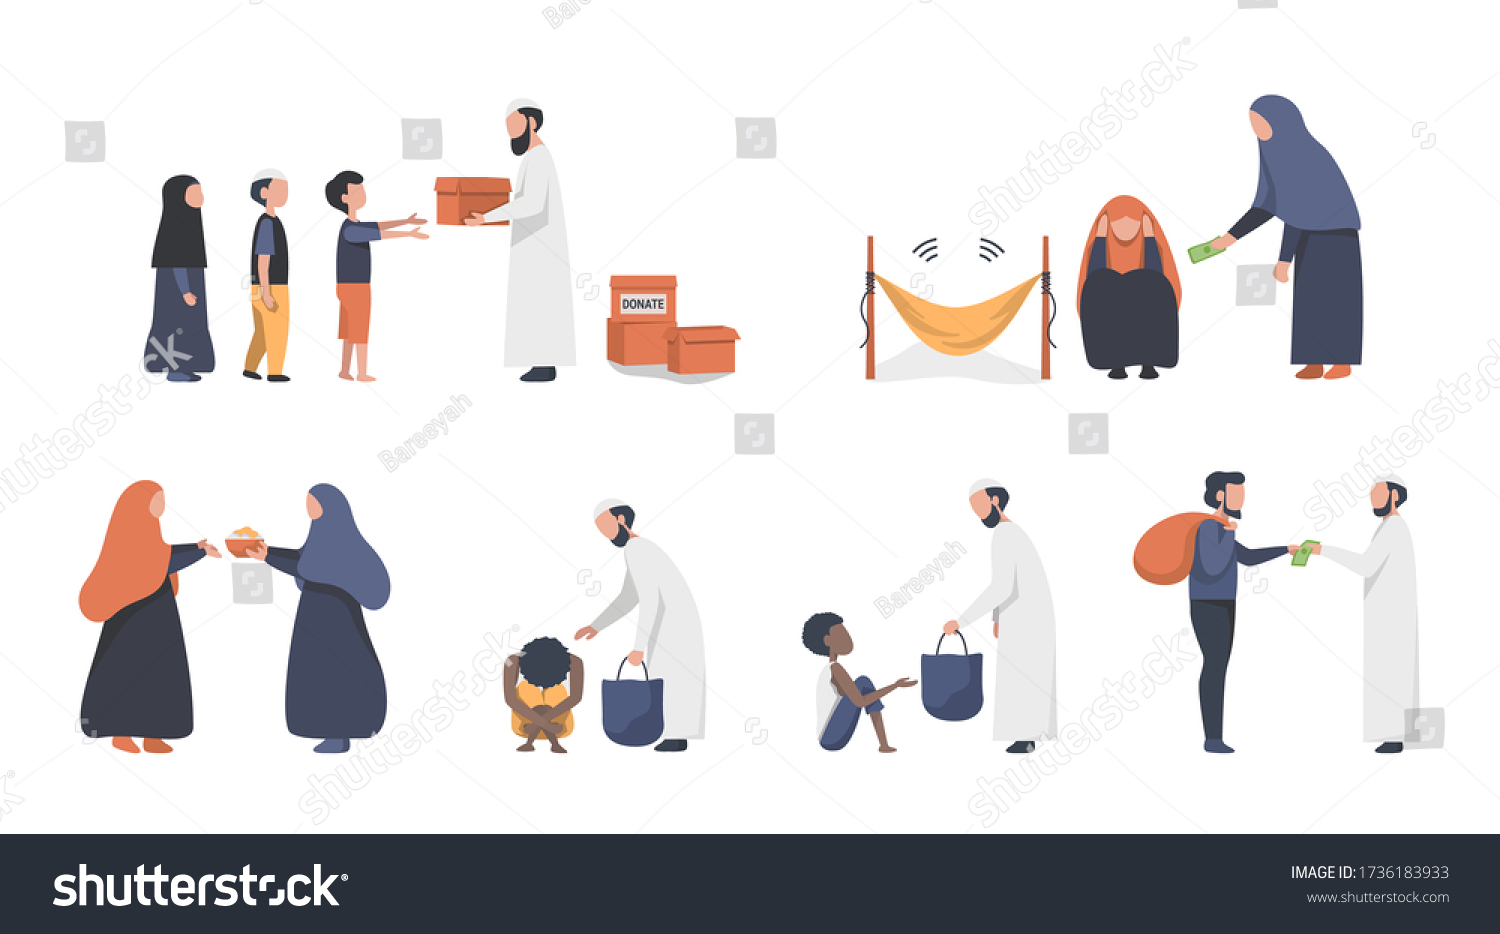 SVG of People are donating giving various types of people as prescribed by Islam. Practice during Ramadan. Illustration about Muslim donations. svg